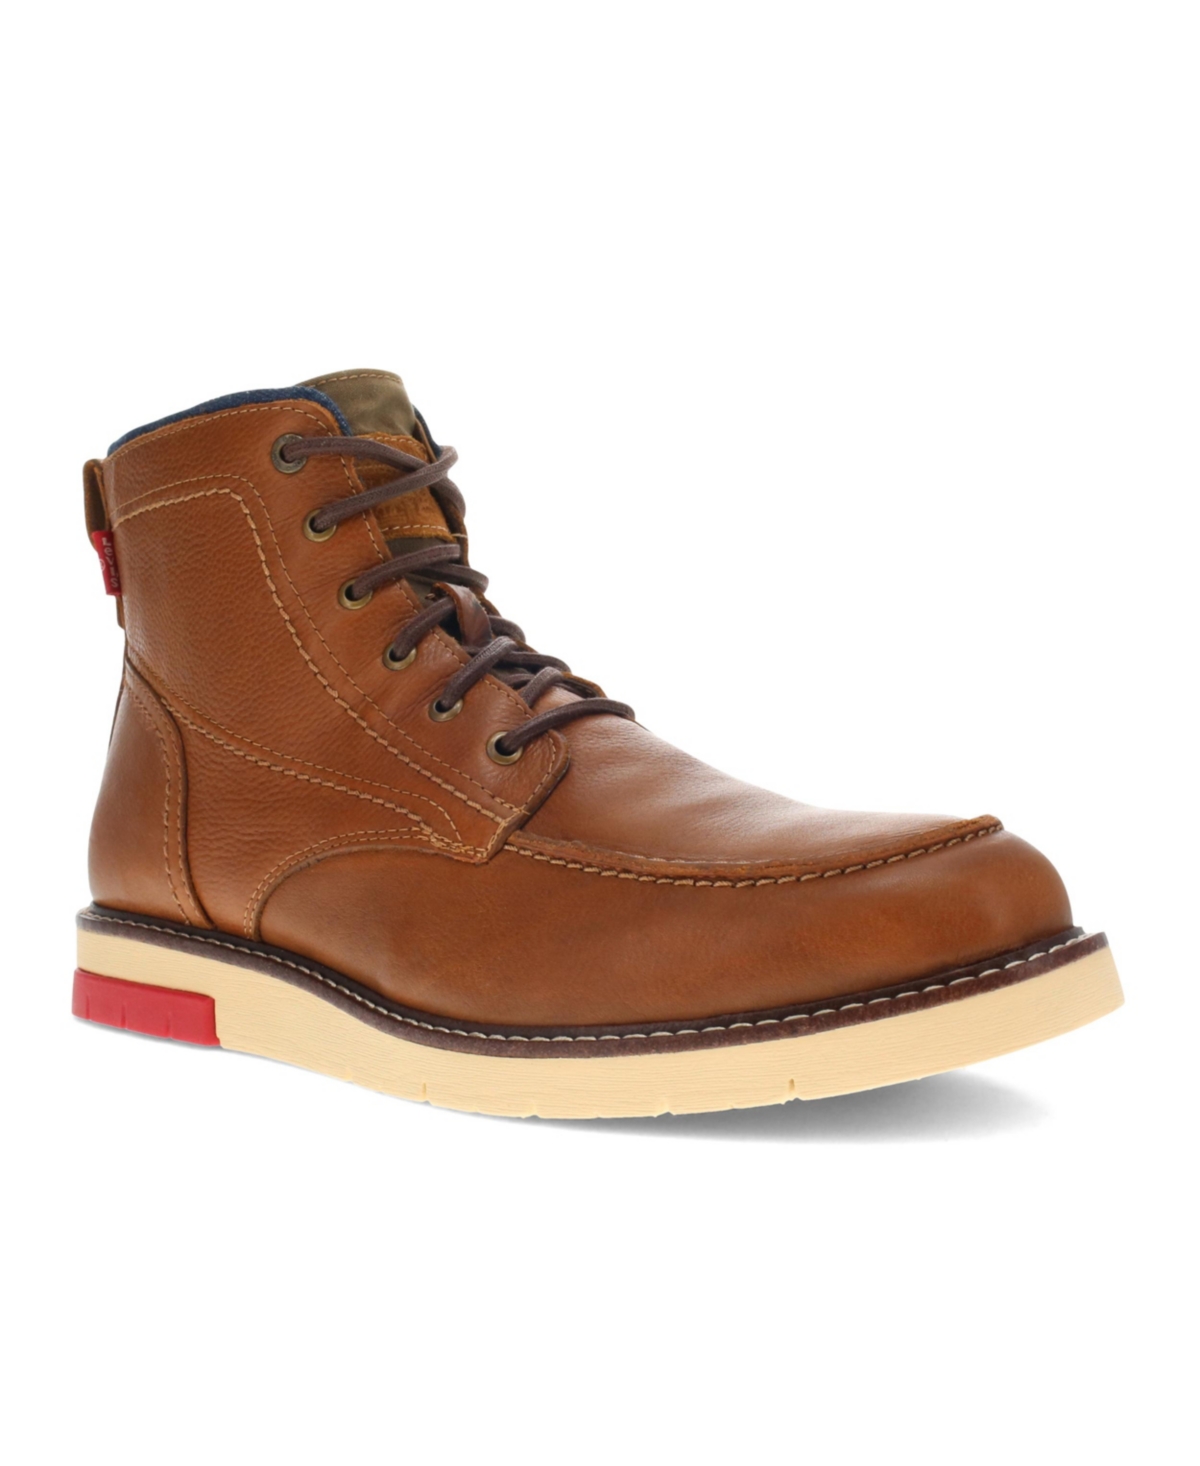 Levi's Men's Daleside Lace-up Boots In British Tan